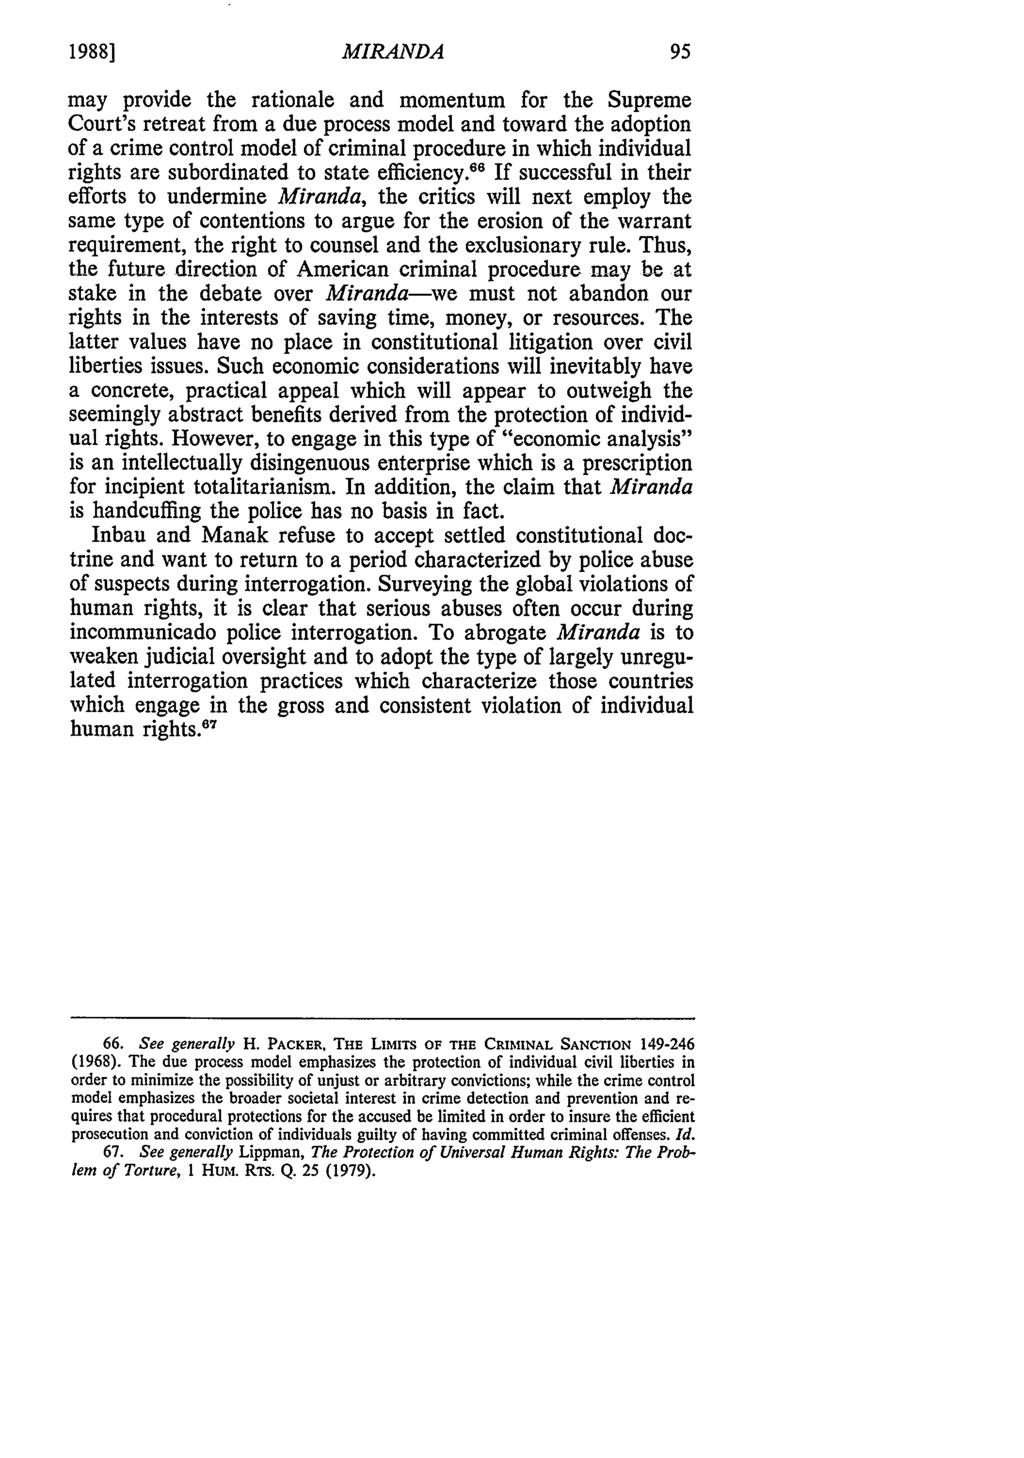 1988] Lippman: OPINION MIRANDA OF A SCHOLAR - A Commentary on Inbau and Manak's "Miranda may provide the rationale and momentum for the Supreme Court's retreat from a due process model and toward the